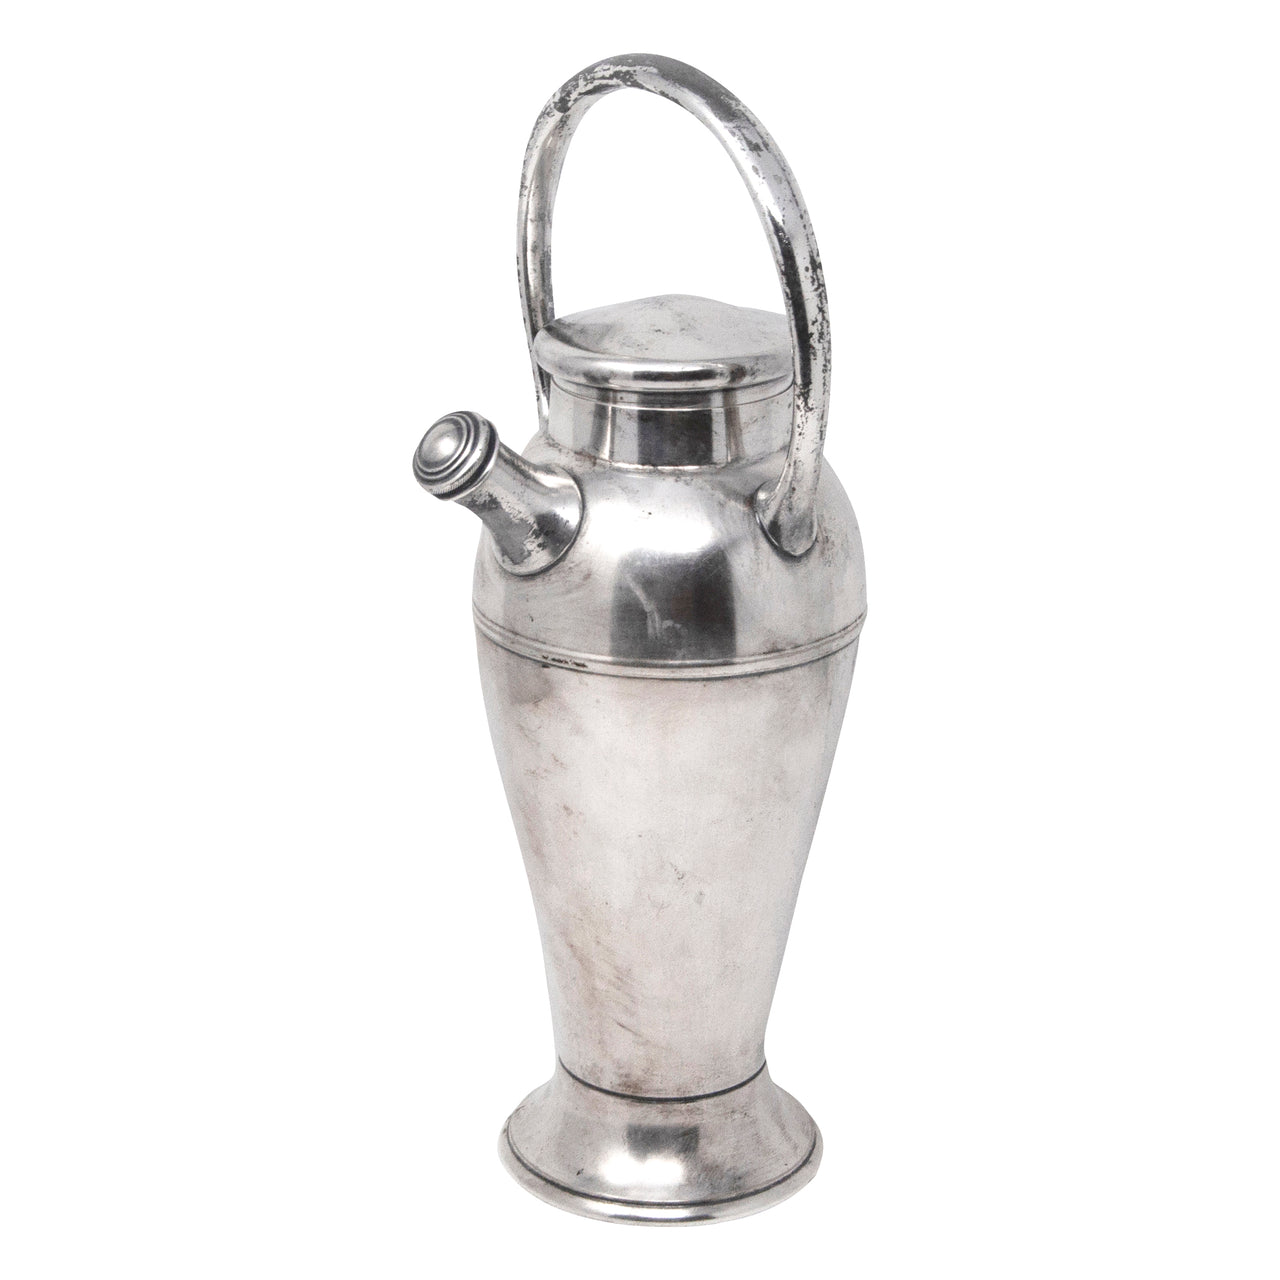 Twist-A-Mixer Silver Plate Cocktail Shaker